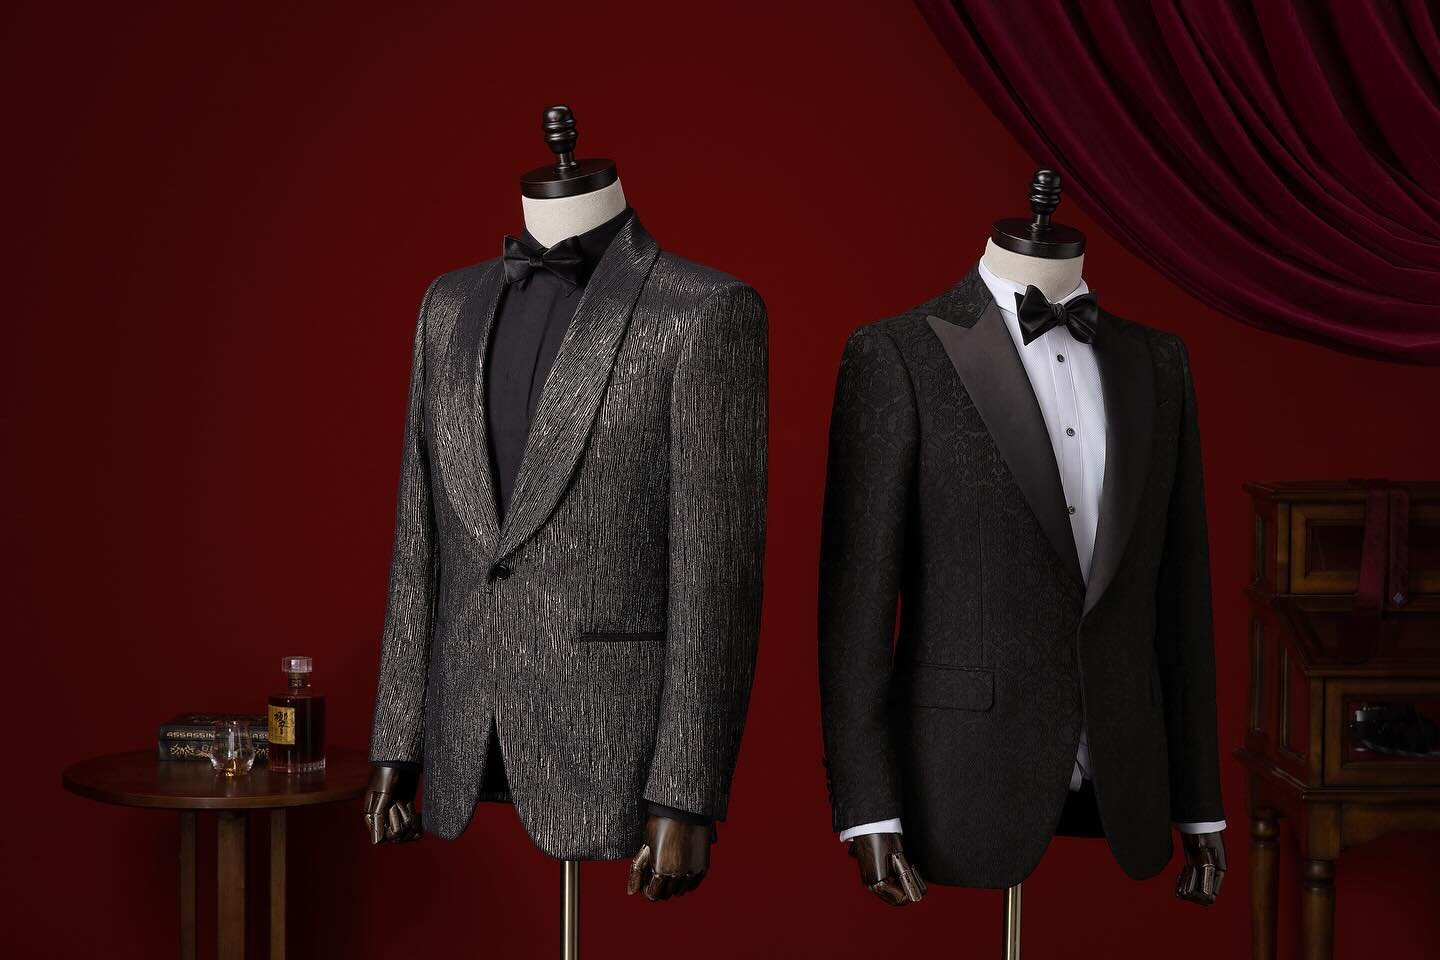 The men&rsquo;s classic tux is back. What was once a rarity in social settings has become a standard in sophisticated wardrobes. The tux isn&rsquo;t just for grooms&mdash; it can be the perfect outfit for an art gallery, charity event, cocktail party